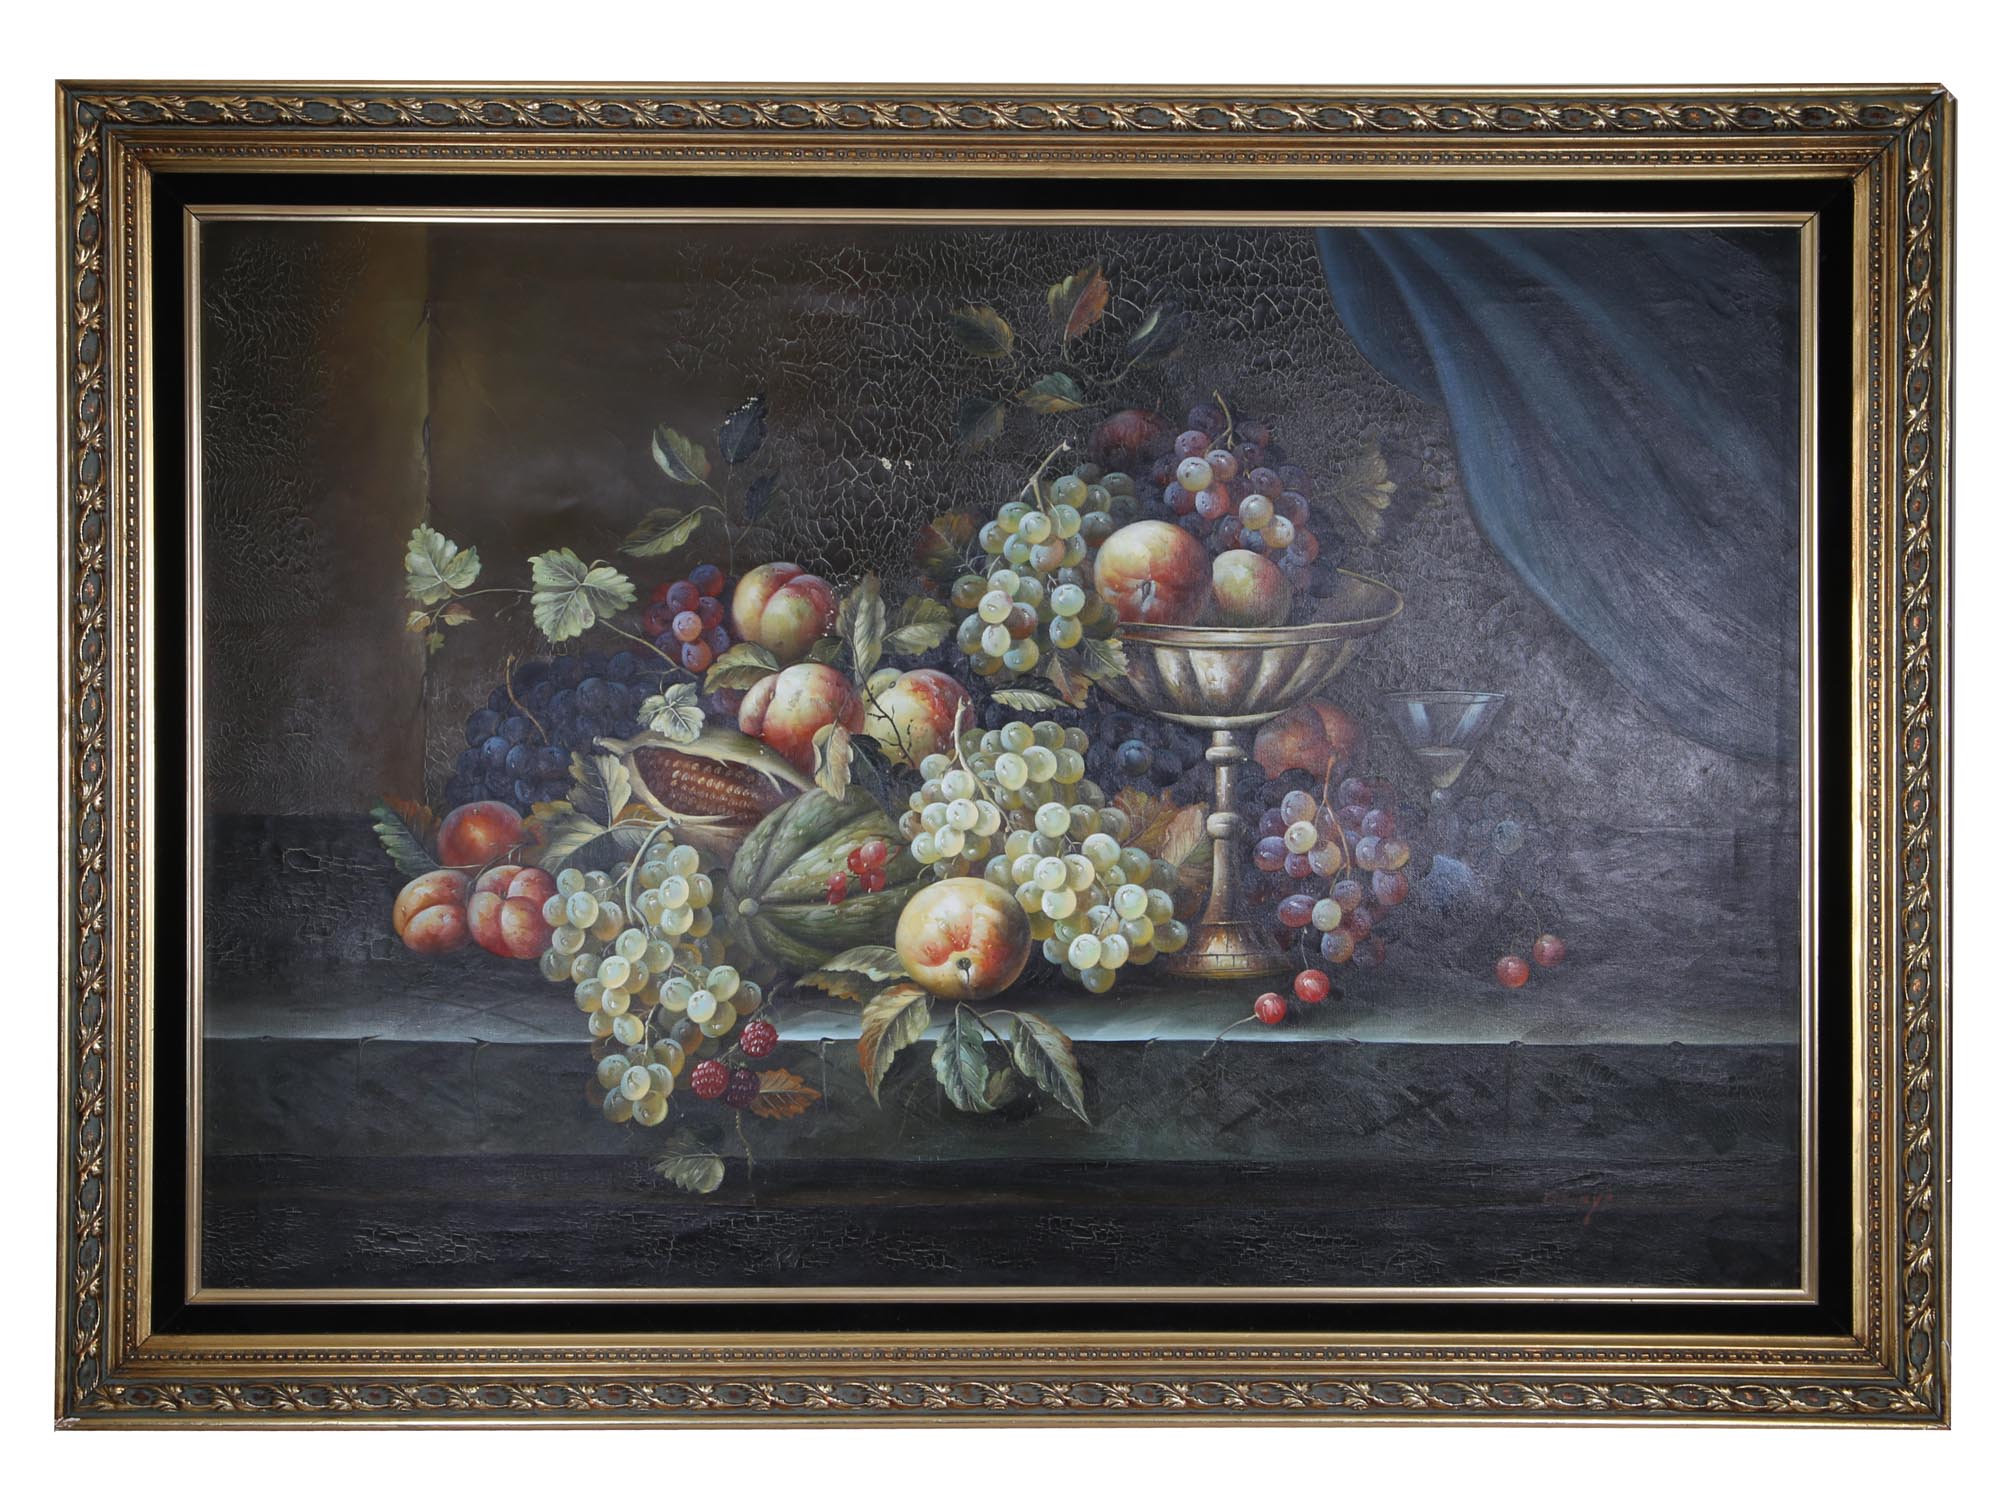 OIL ON CANVAS STILL LIFE PAINTING SIGNED GEORYZ PIC-0